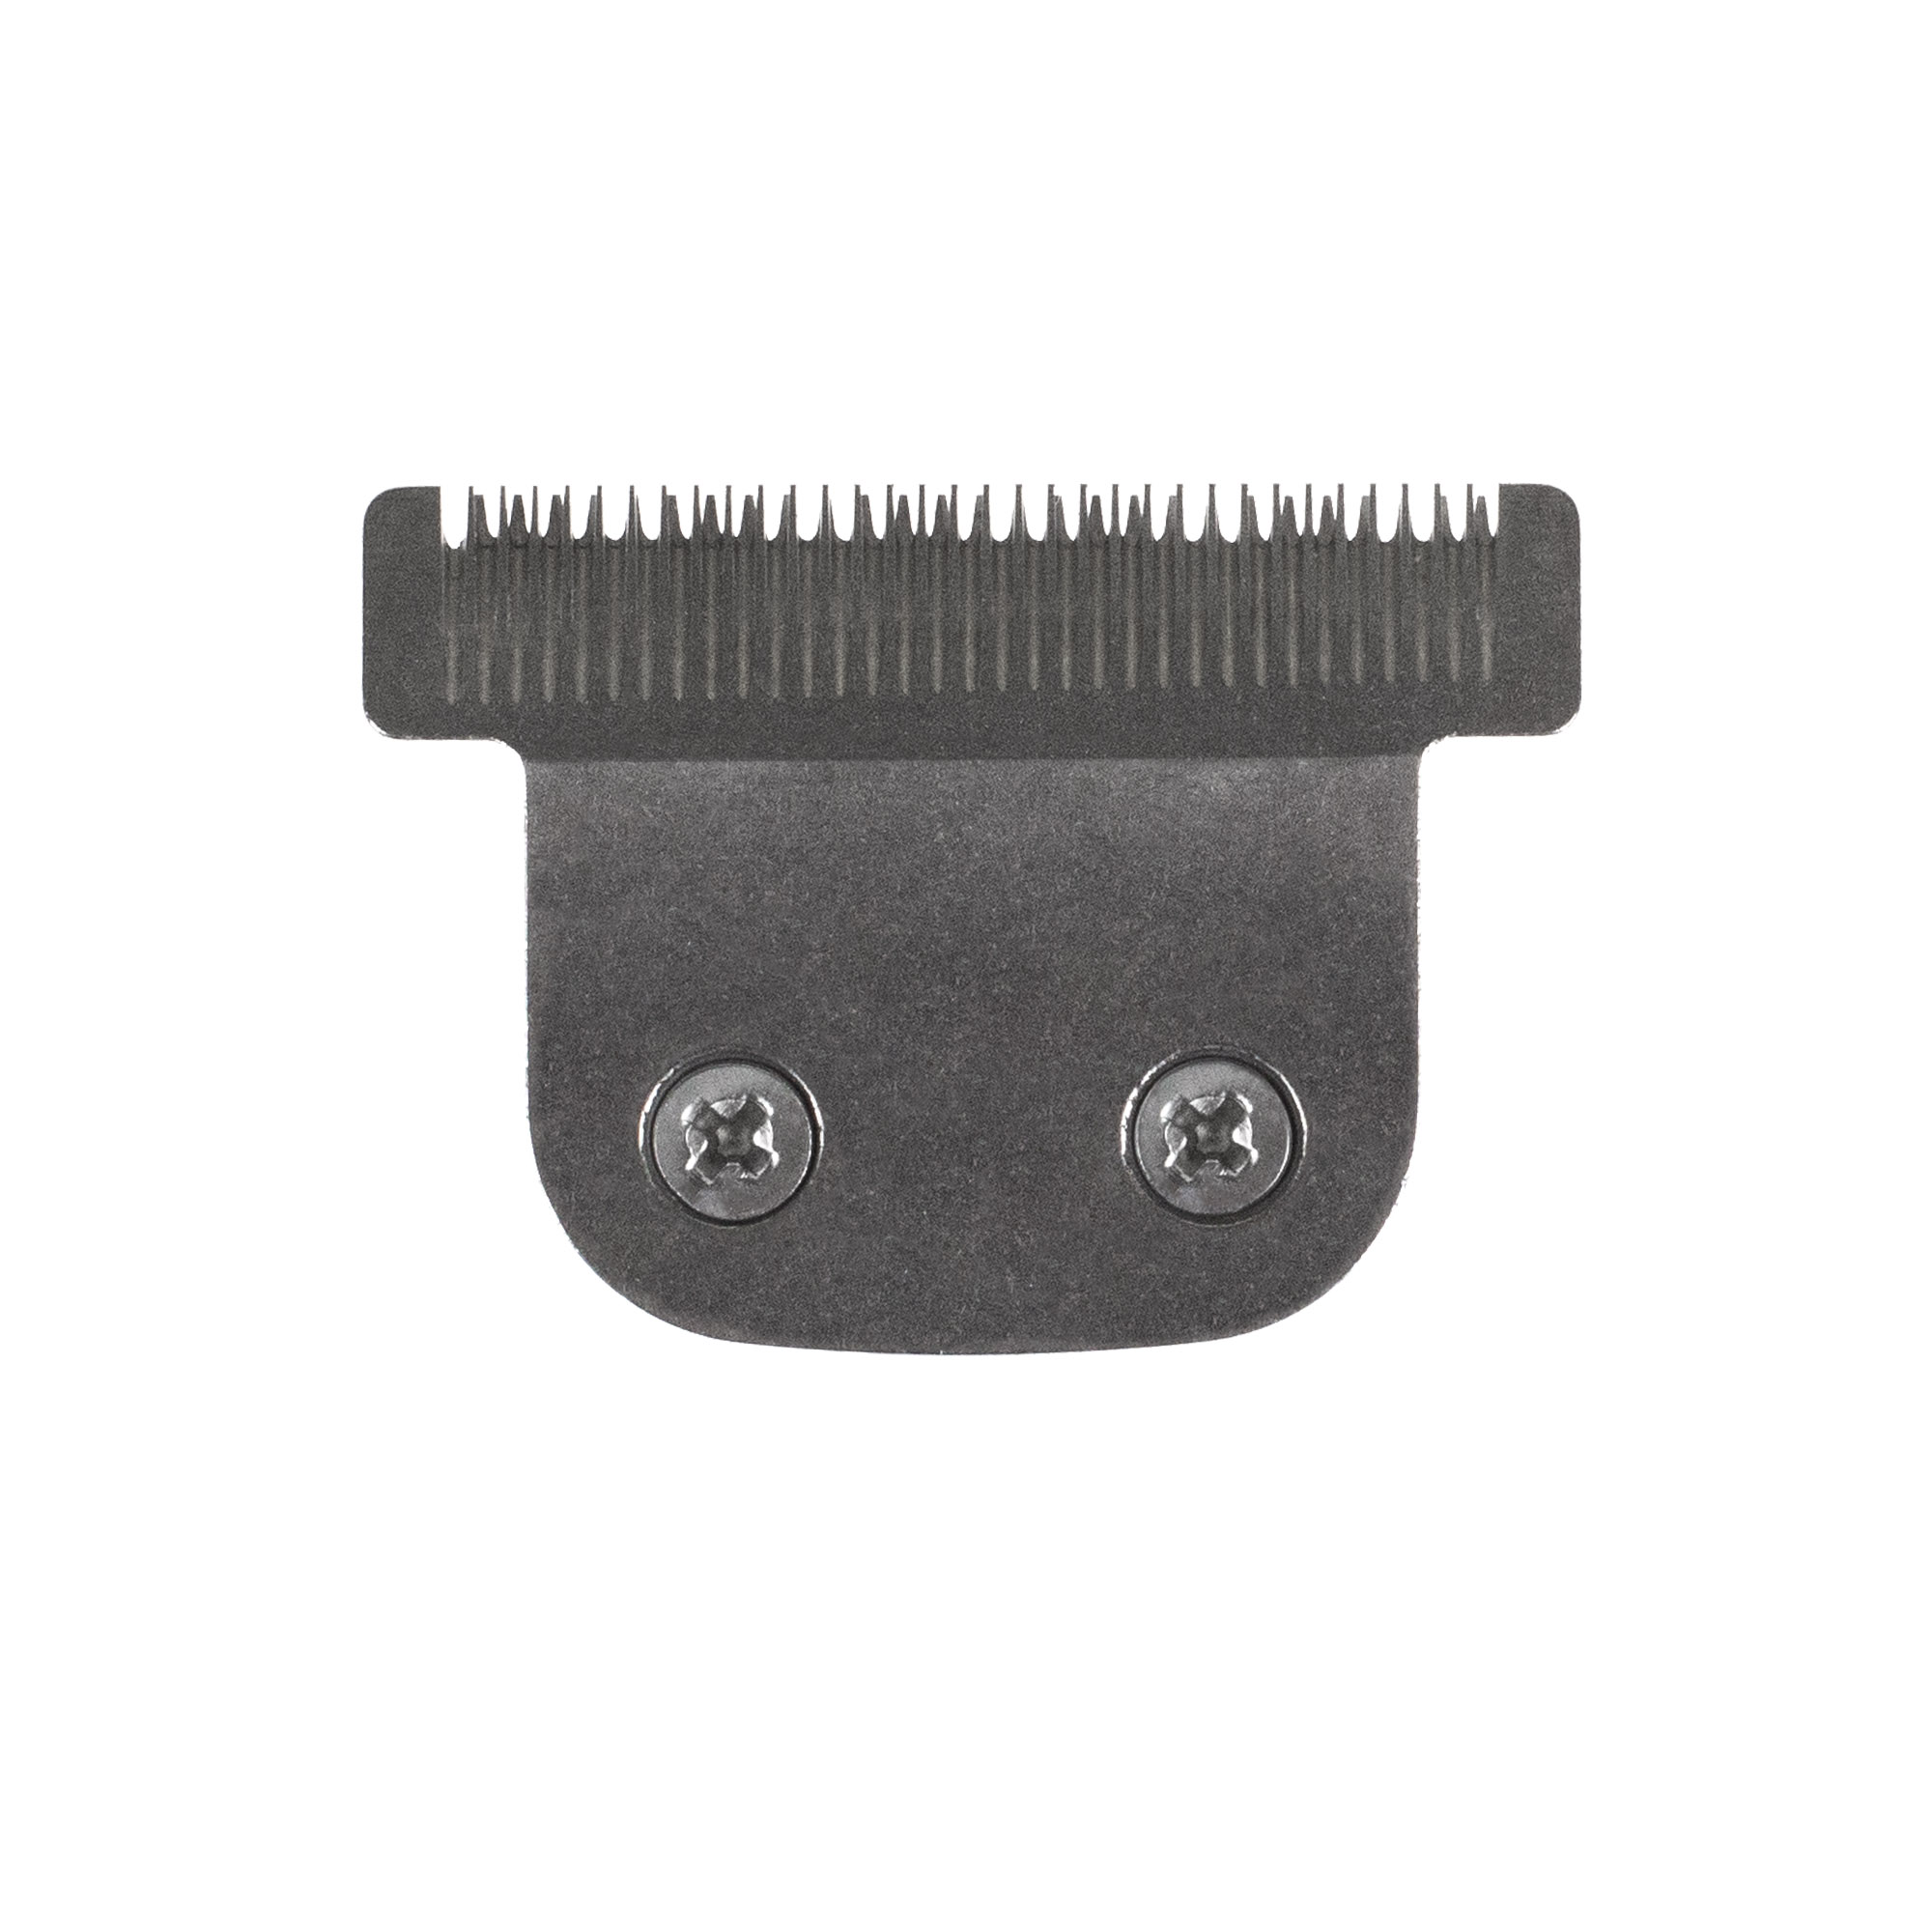 wahl model 9818l replacement blades